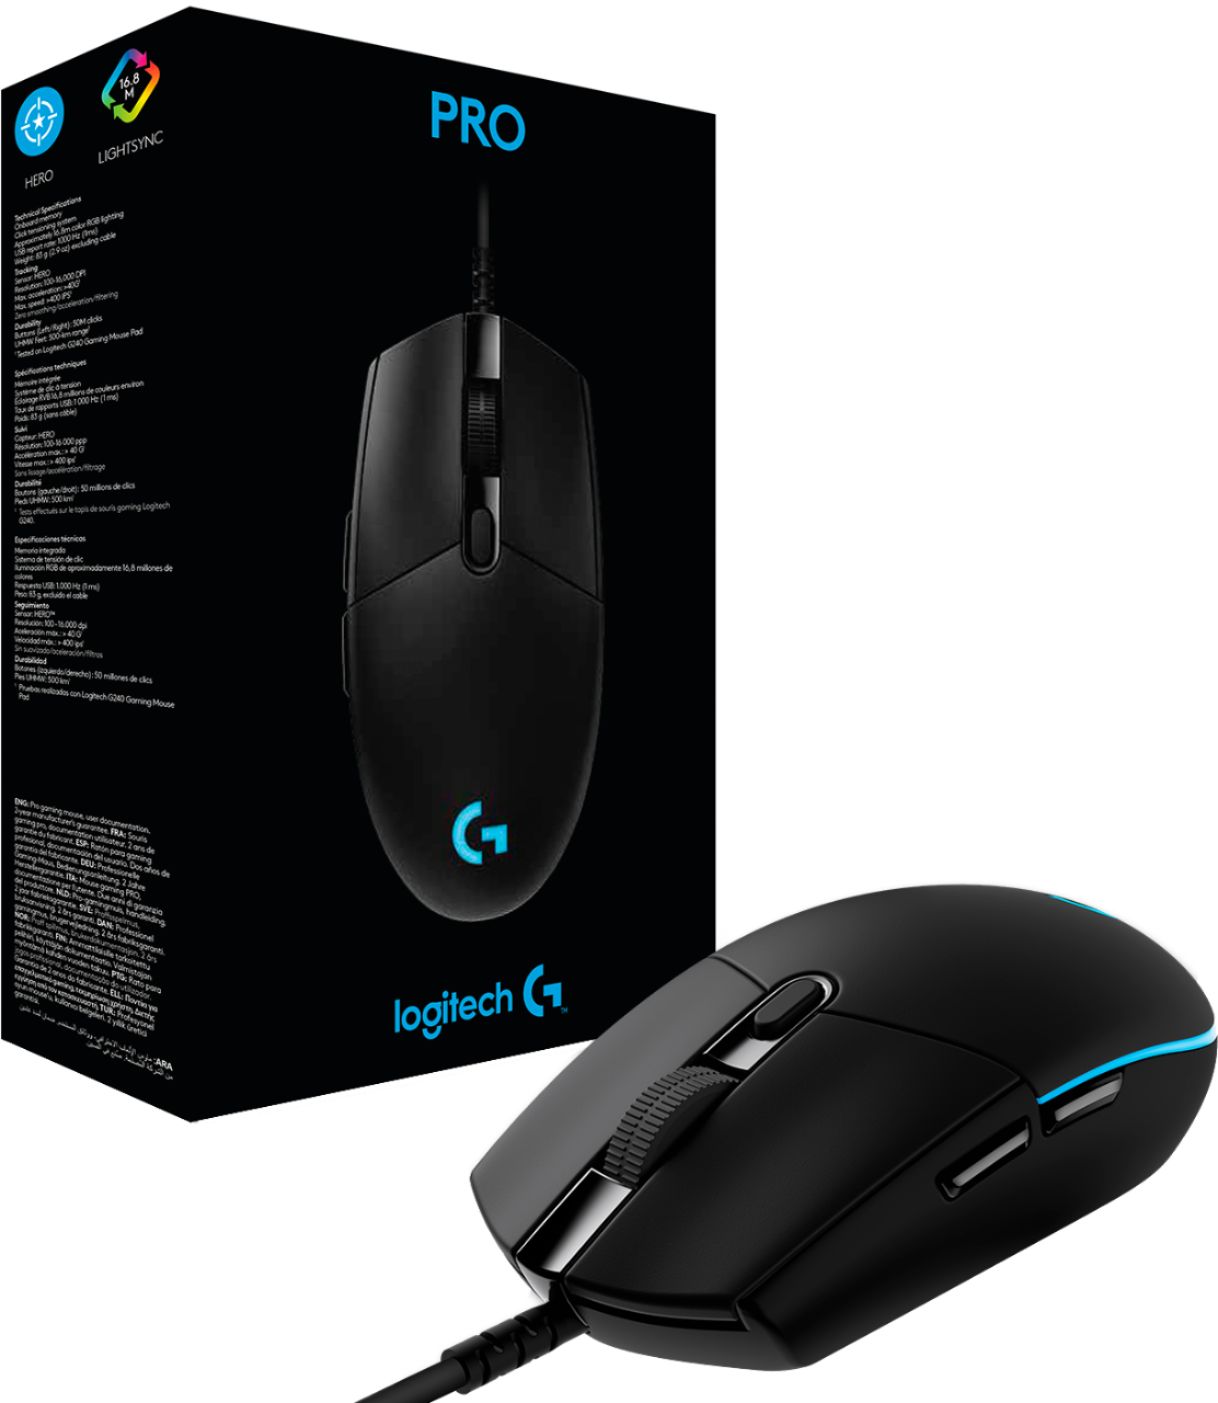 Logitech G Pro (Hero) Wired Optical Gaming Mouse with LIGHTSYNC RGB Lighting Black 910-005439 - Best Buy